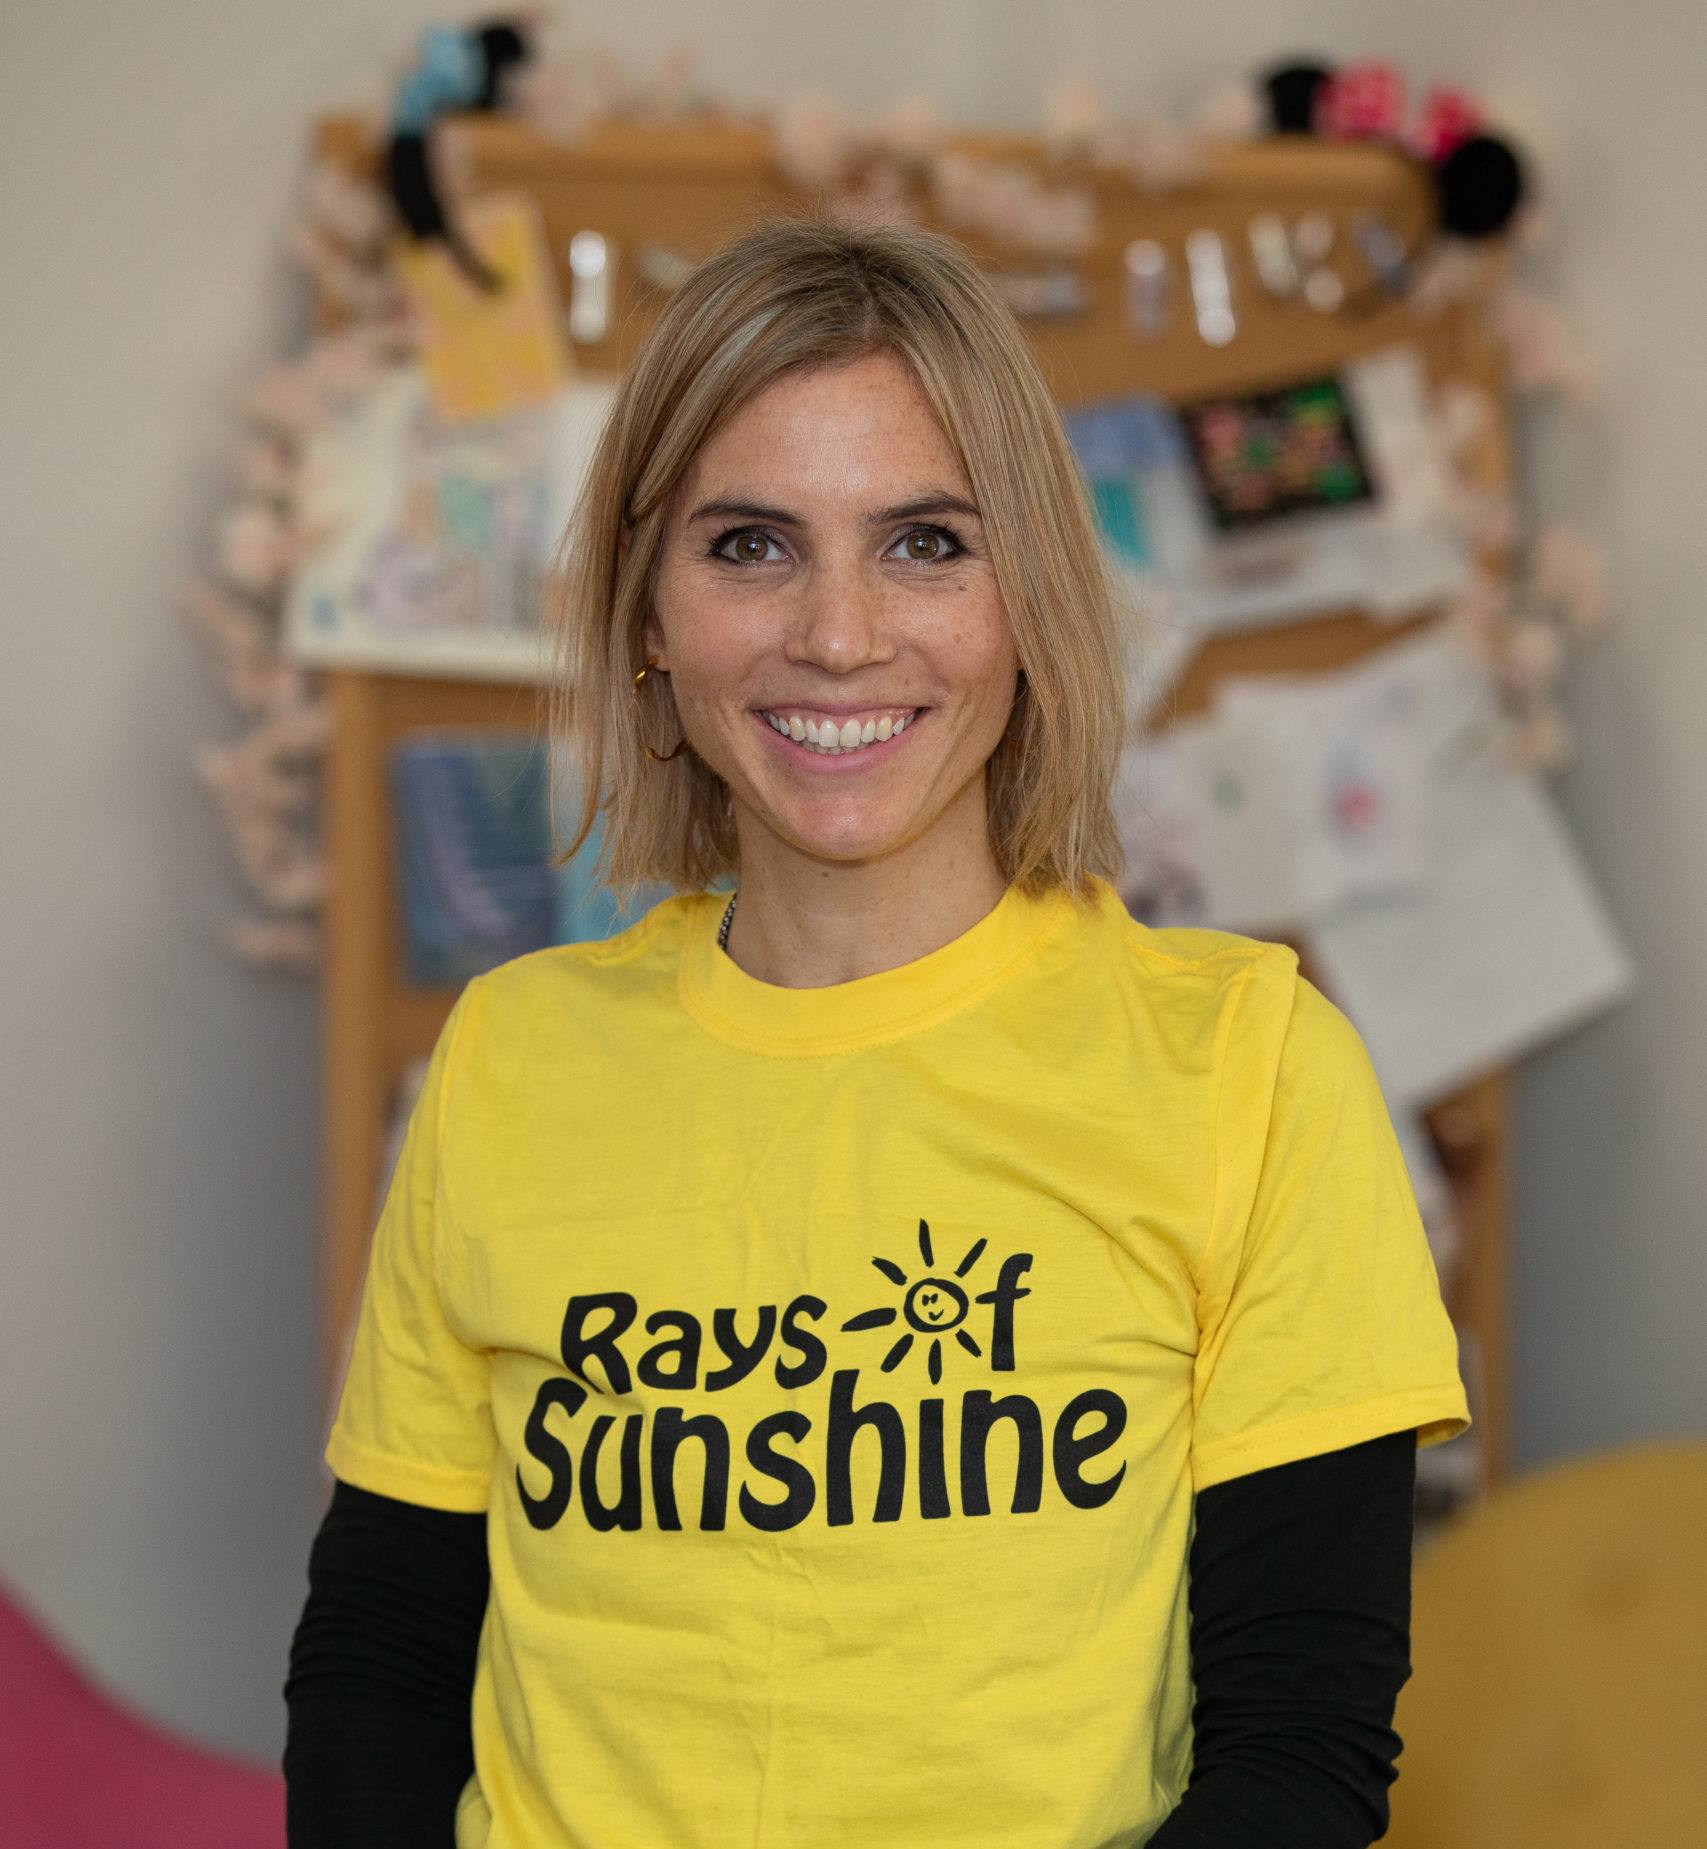 Jenny is standing and is wearing a Rays of Sunshine t-shirt. She has blonde hair.